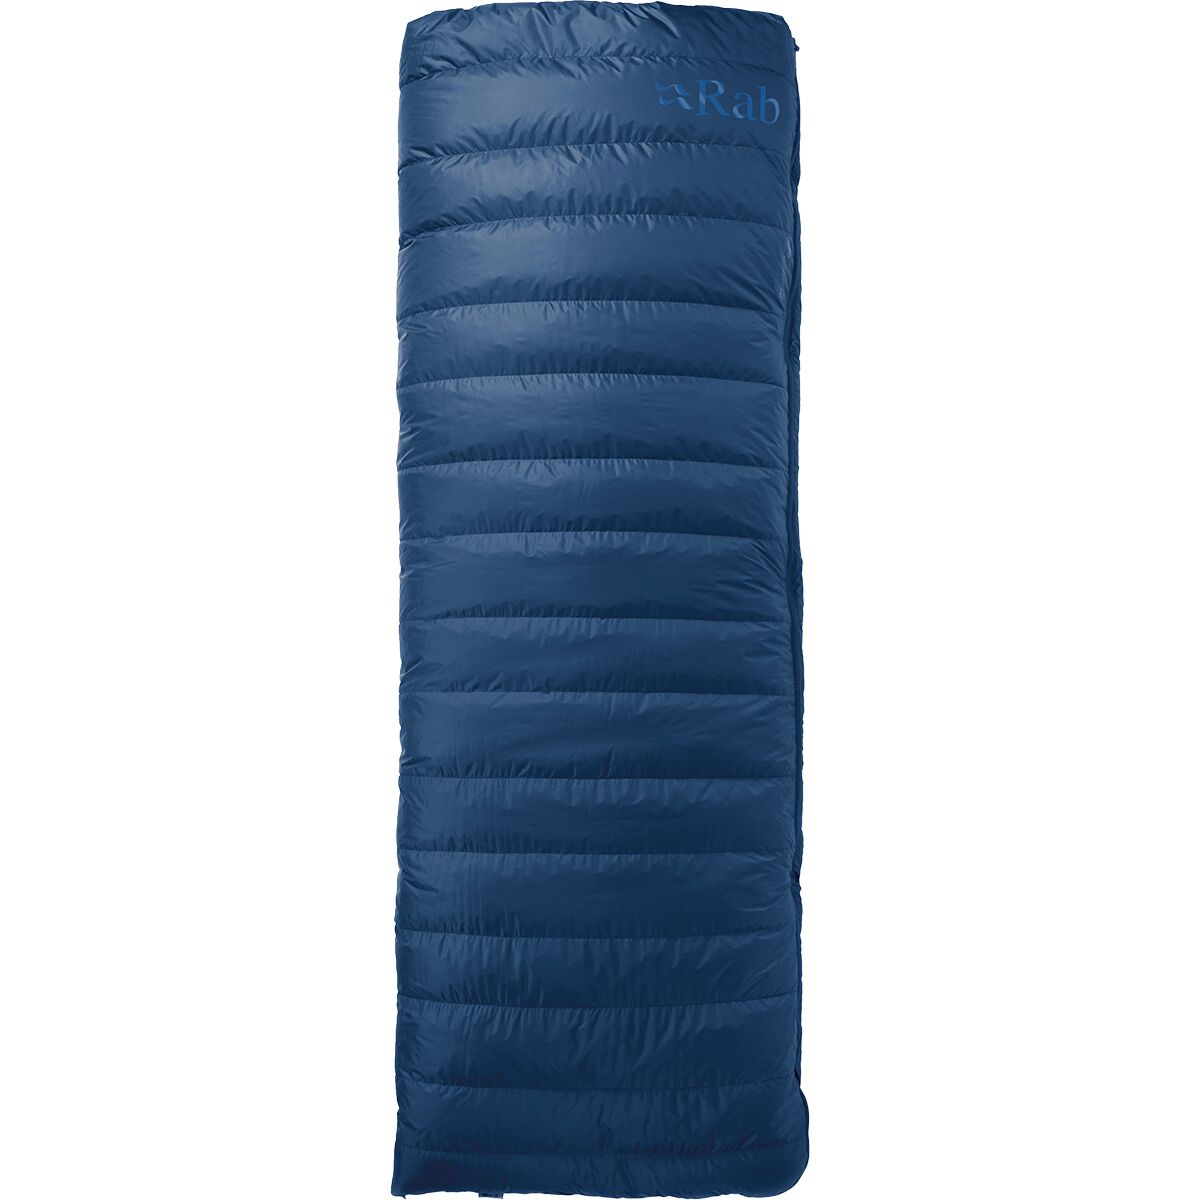 Outpost 500 Sleeping Bag: 35F Down